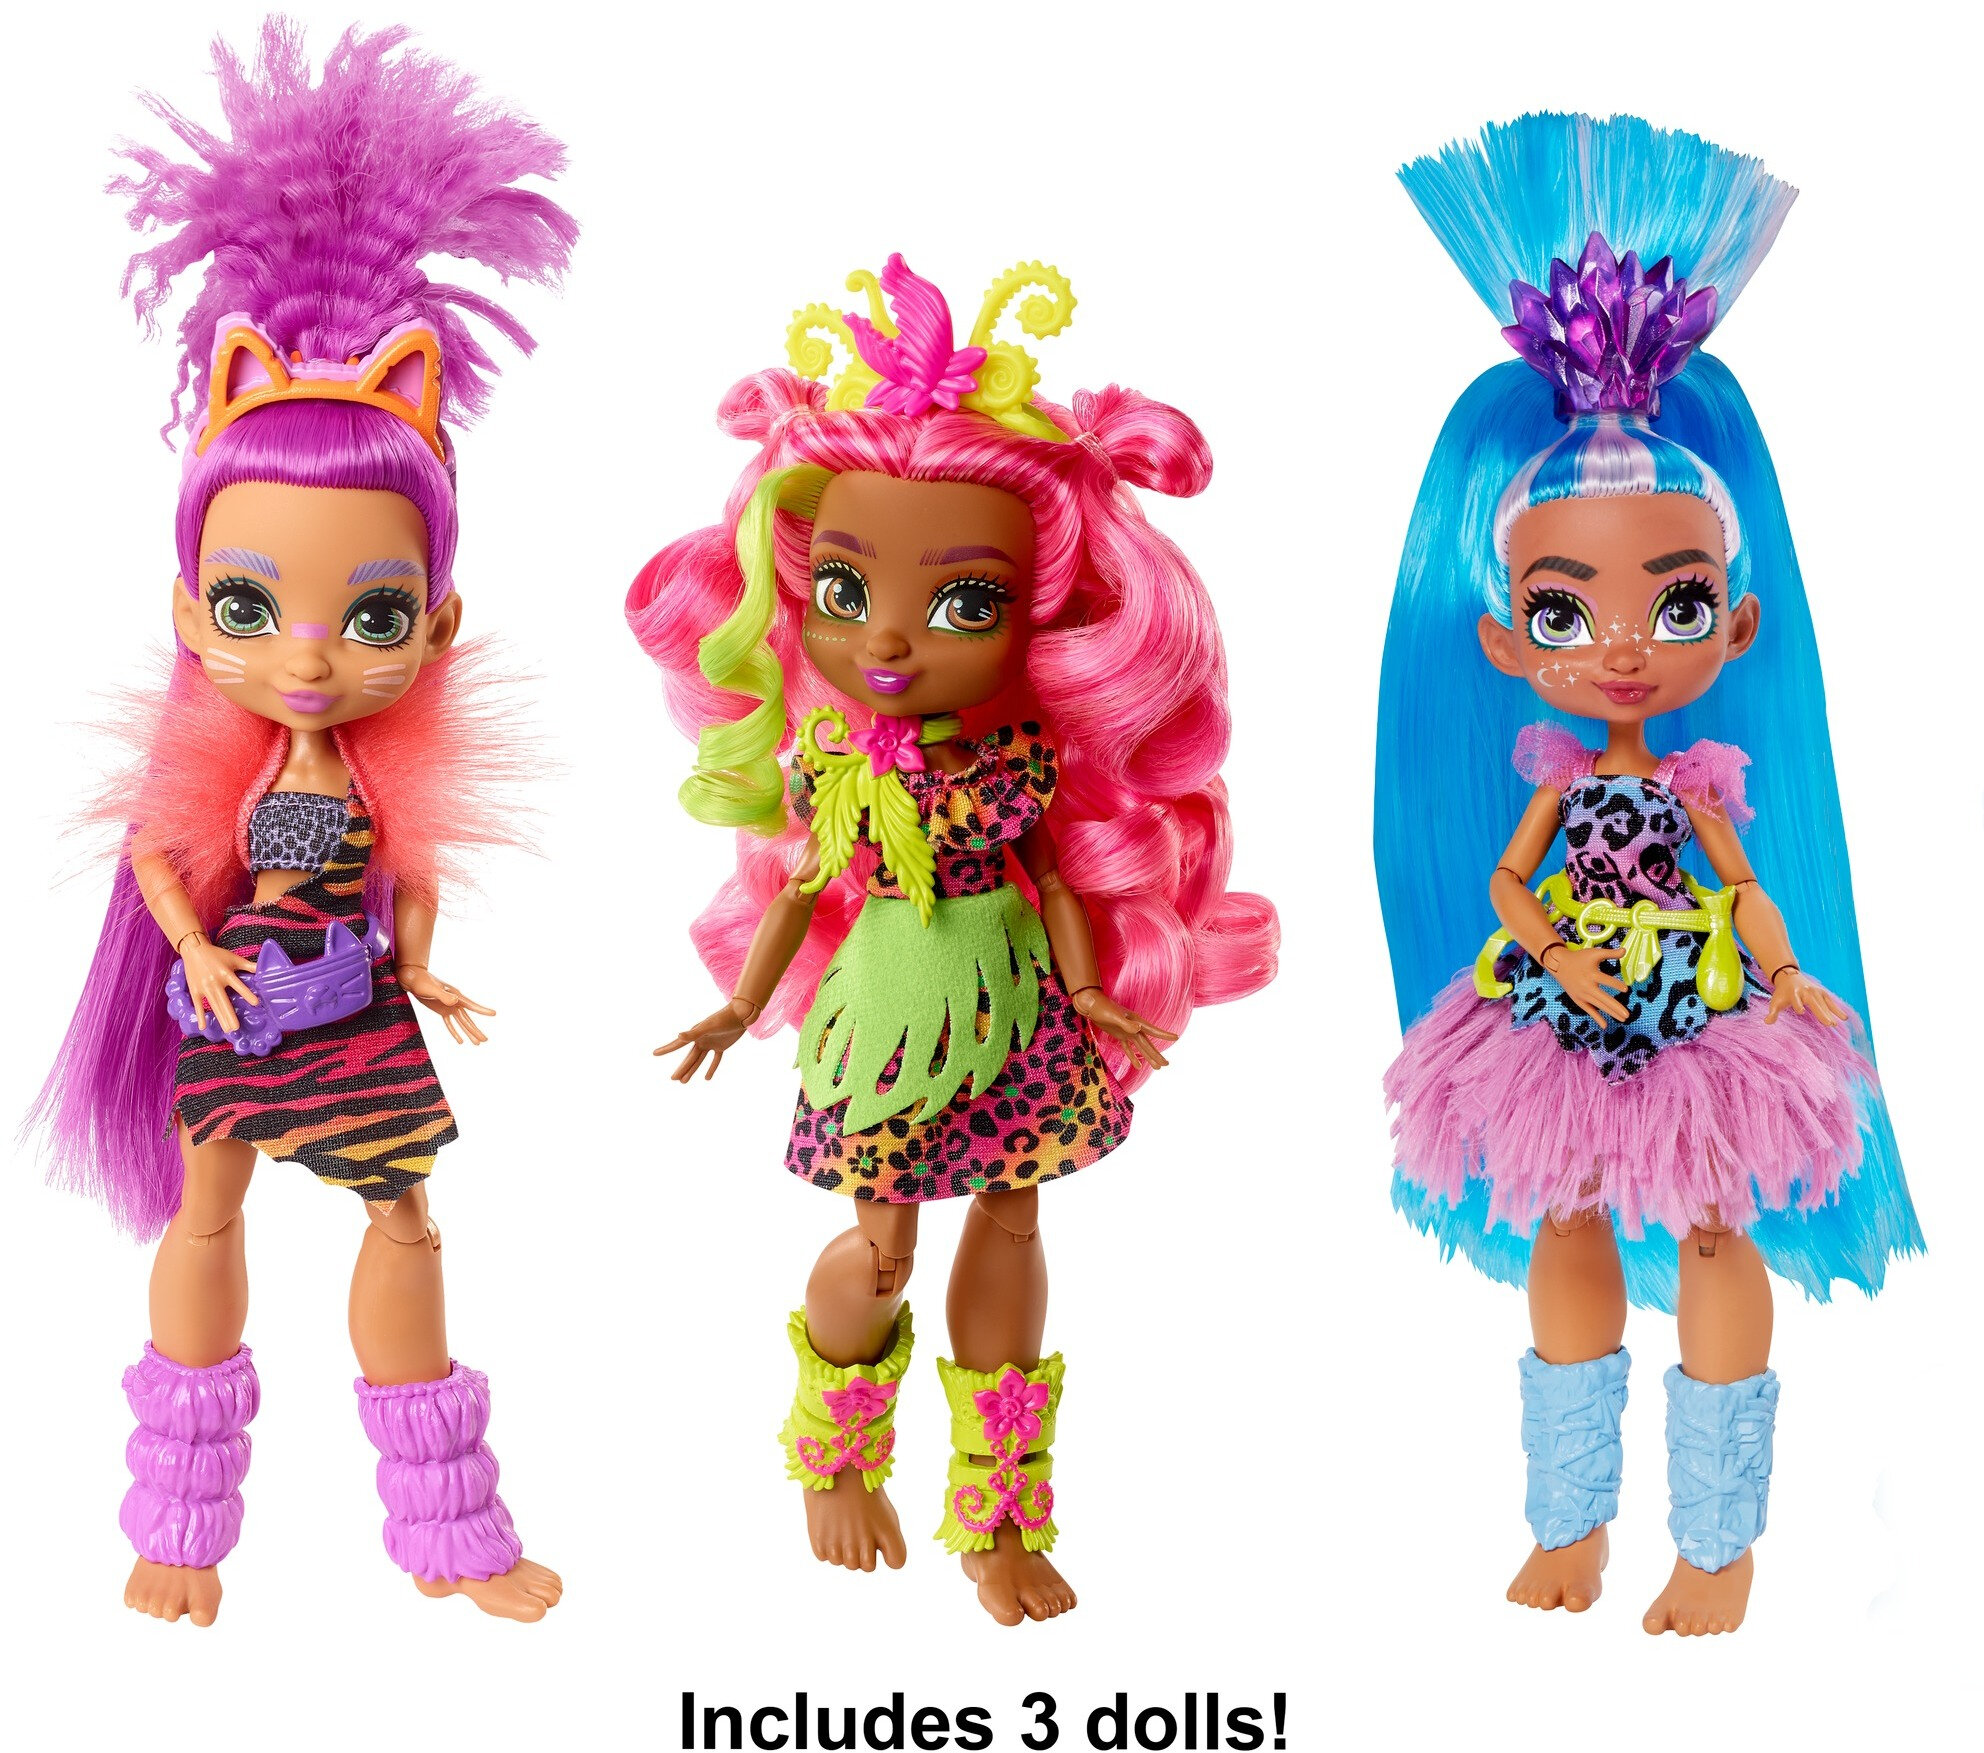 Cave Club Doll 3-Pack (10-inch) Poseable Prehistoric Fashion Dolls with Neon Hair - image 3 of 6